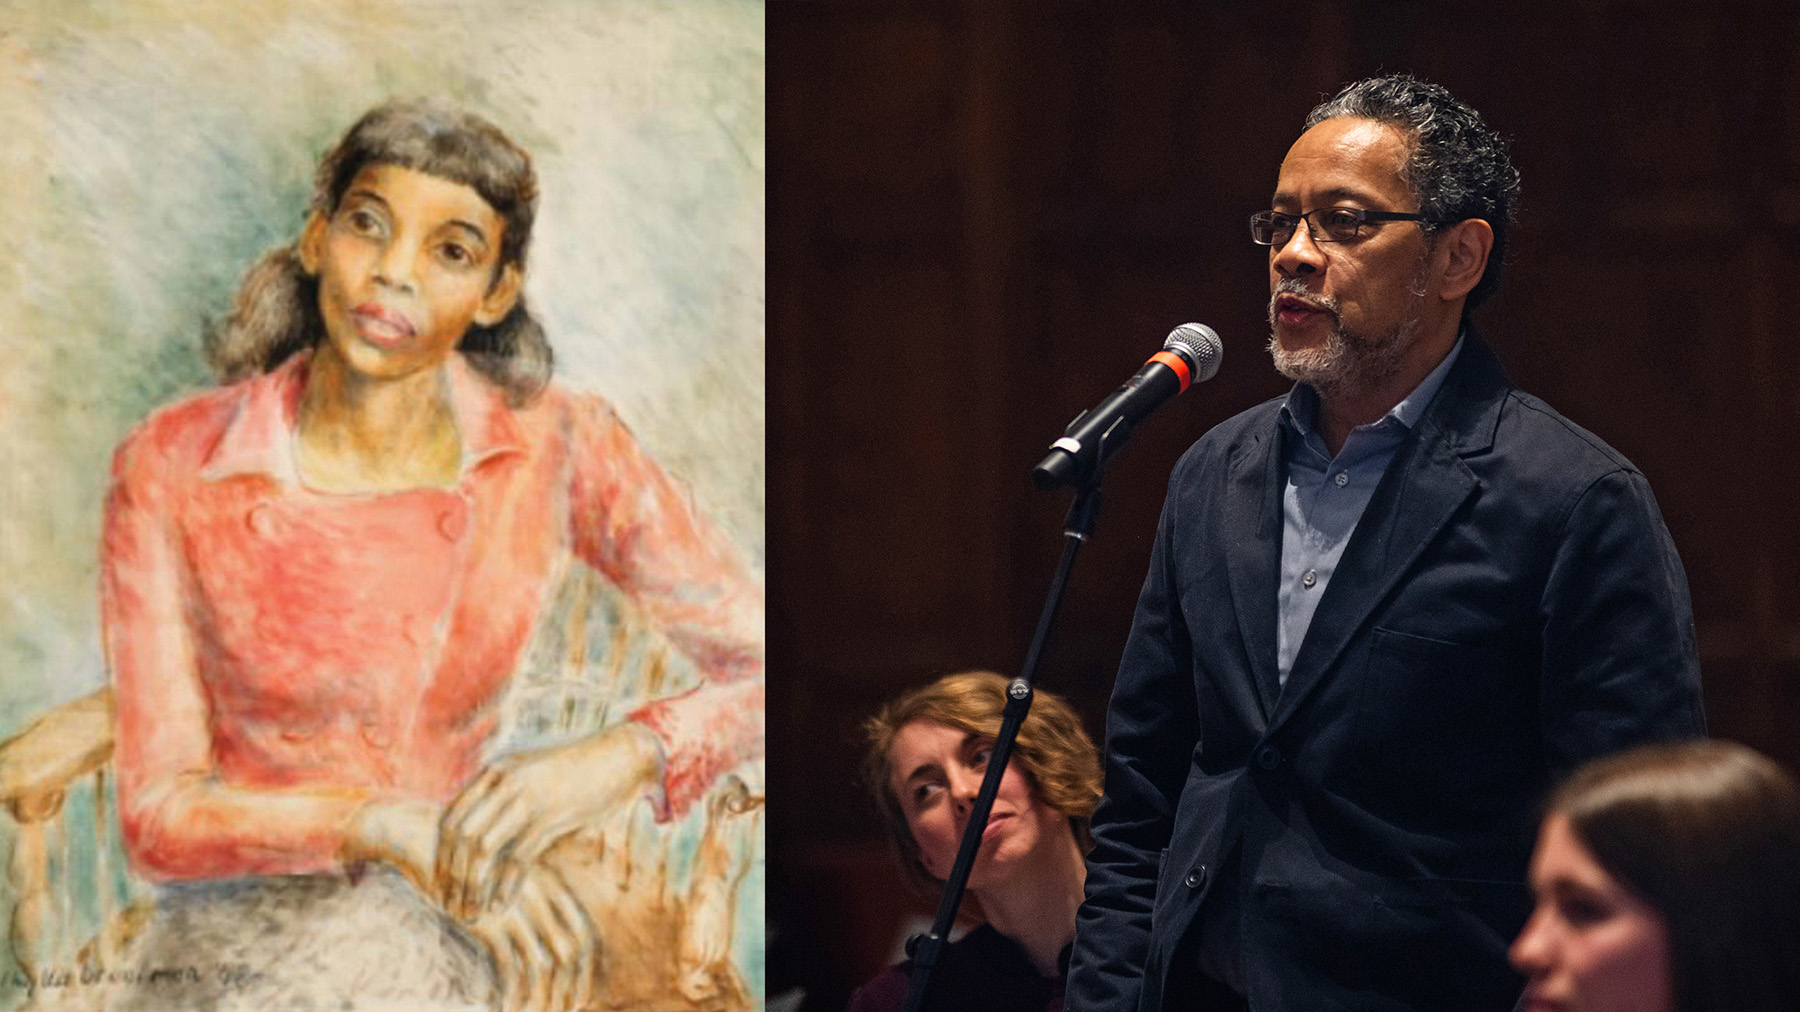 Side-by-side collage of two photos. The left is an old watercolor style painting of a woman with a red sweater sitting in a chair. The right picture is a man in a suit speaking at a microphone with audience members behind him.